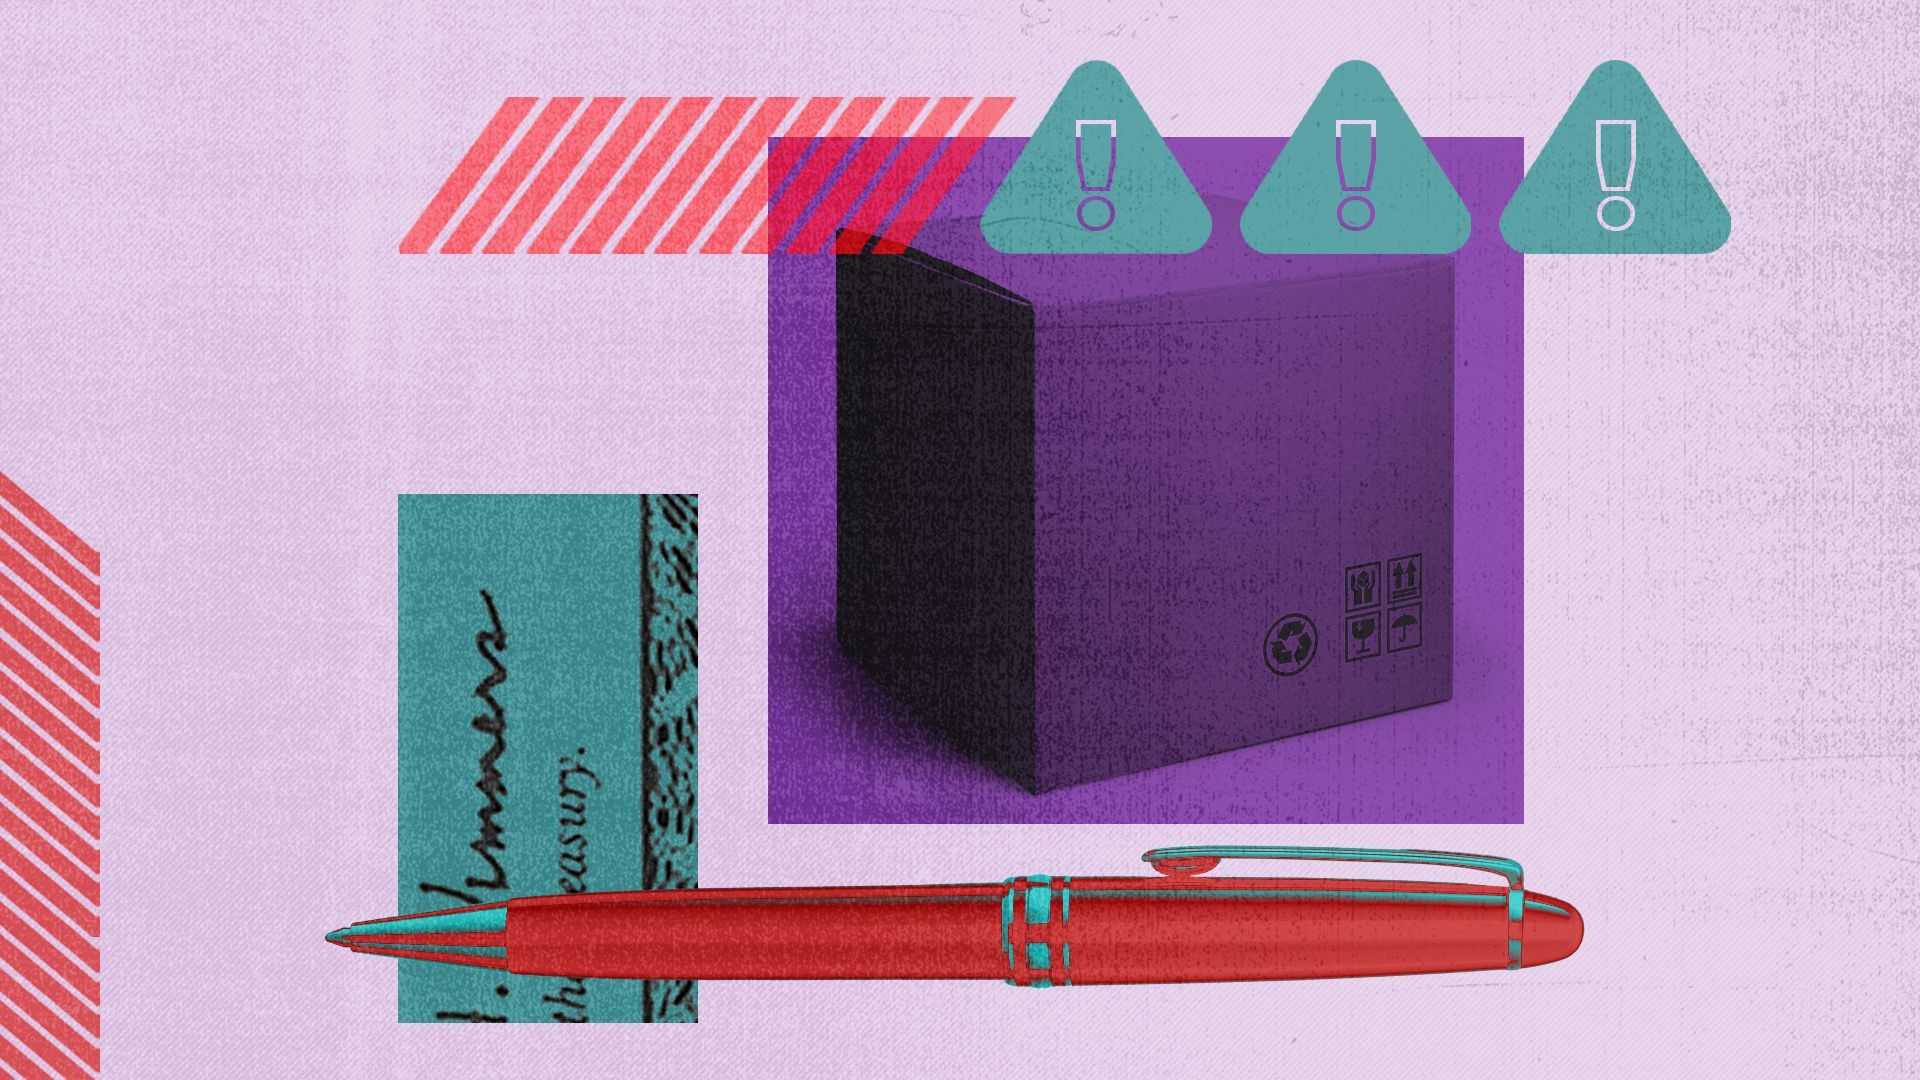 Illustration of a cardboard box and a ballpoint pen surrounded by abstract shapes and money elements.